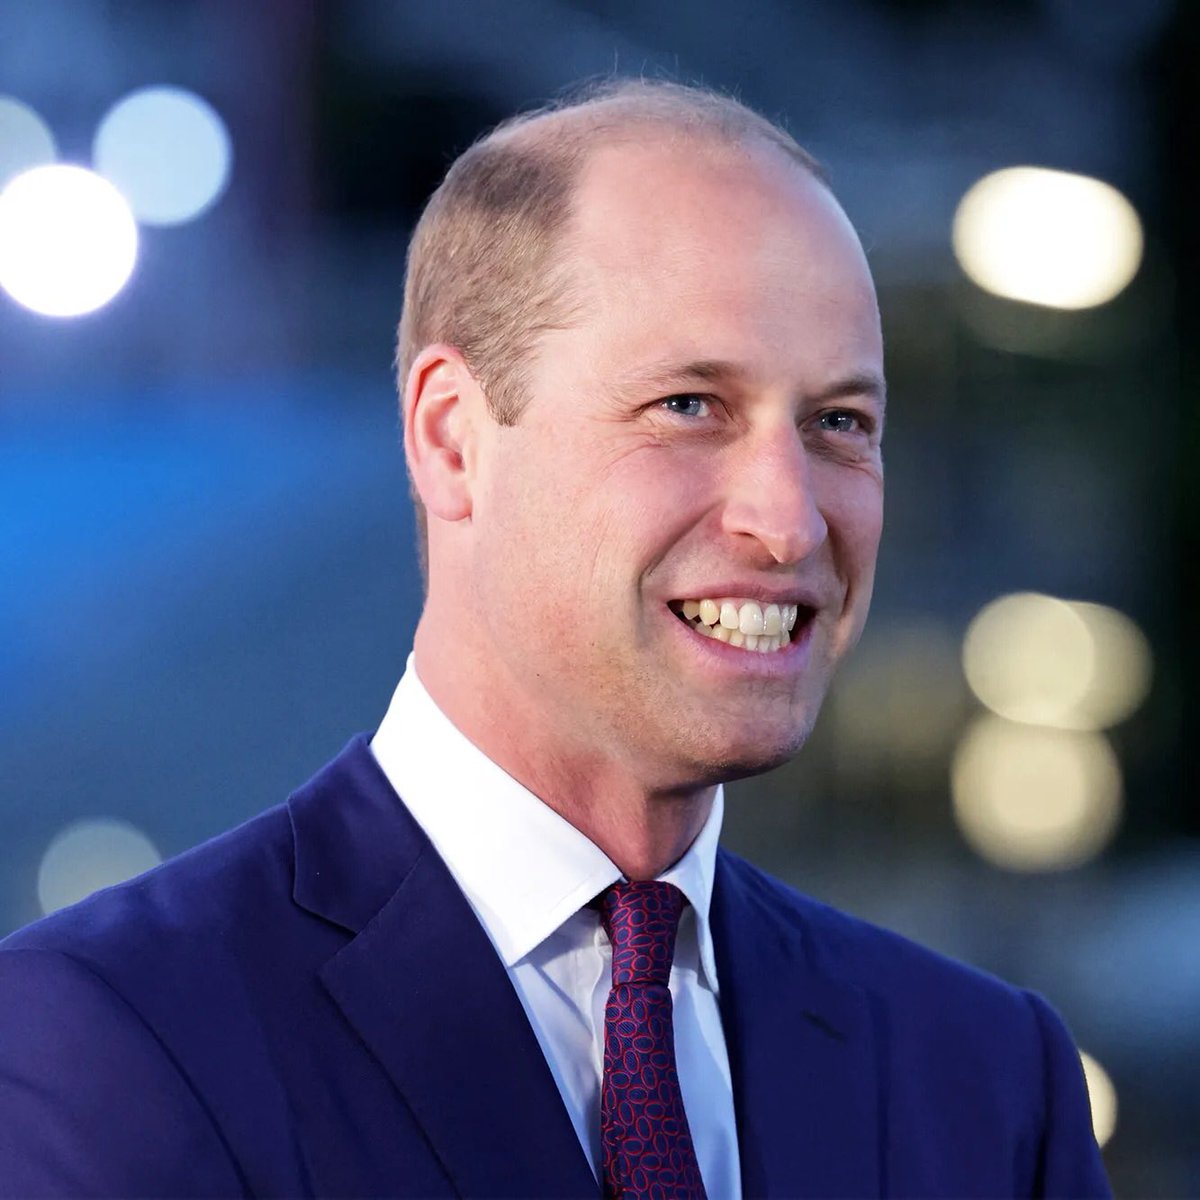 Ladies and Gentlemen Our Future King Prince William The Prince of Wales like and retweet this if you think he is going to be a kind and compassionate King #PrinceWilliam #PrinceofWales #PrinceWilliamisaKing